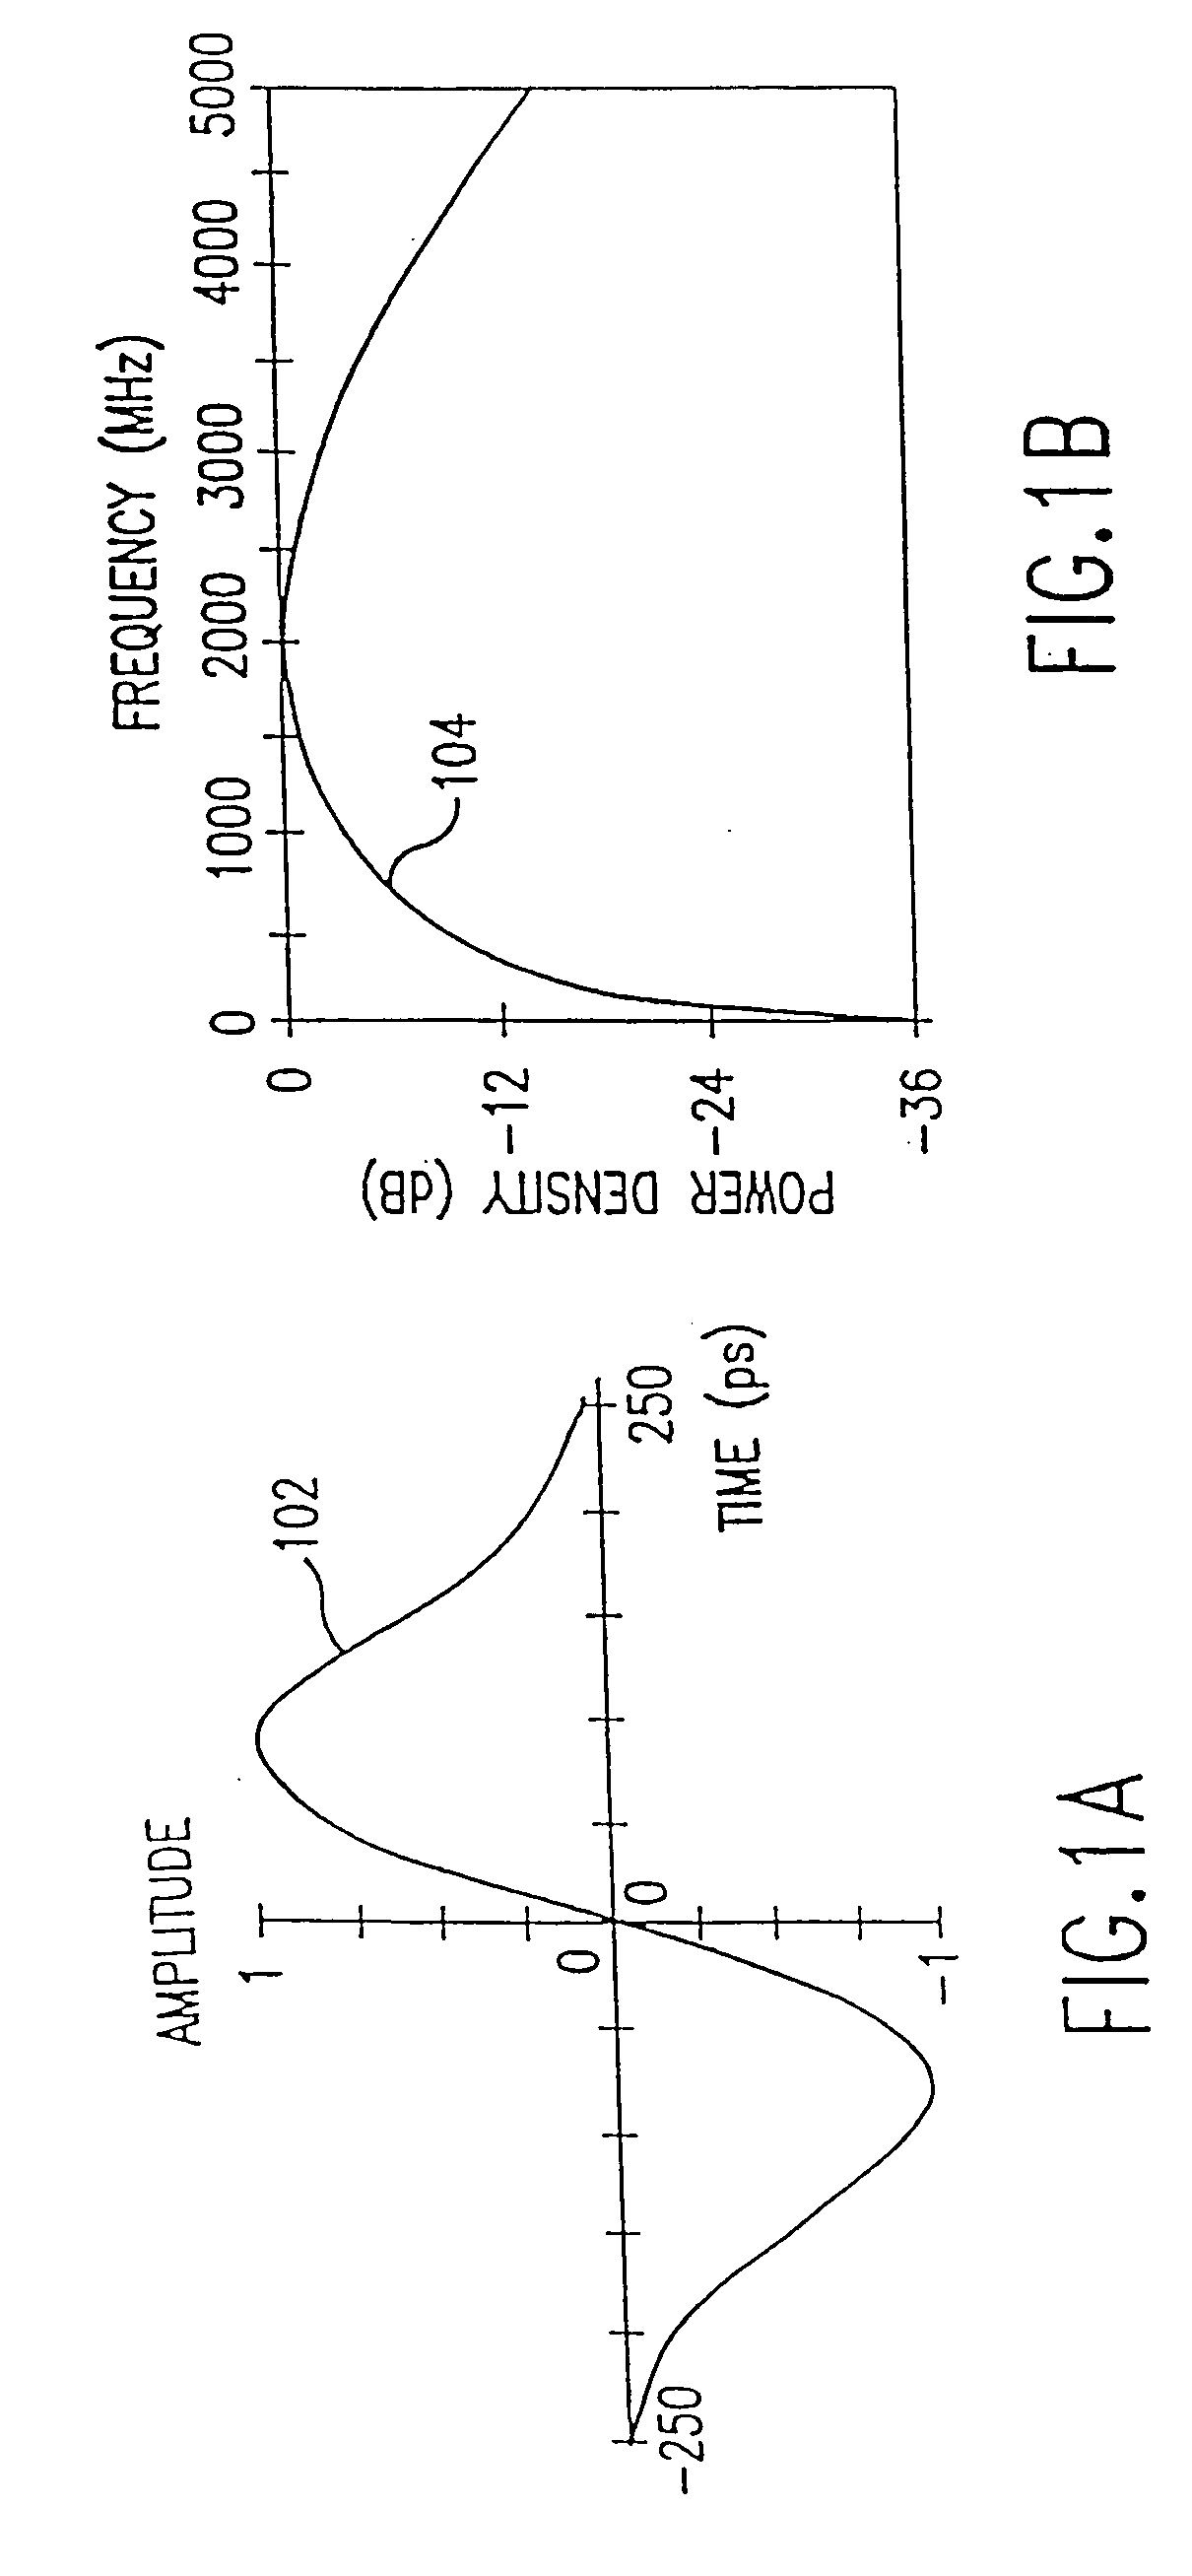 System and method for estimating separation distance between impulse radios using impulse signal amplitude